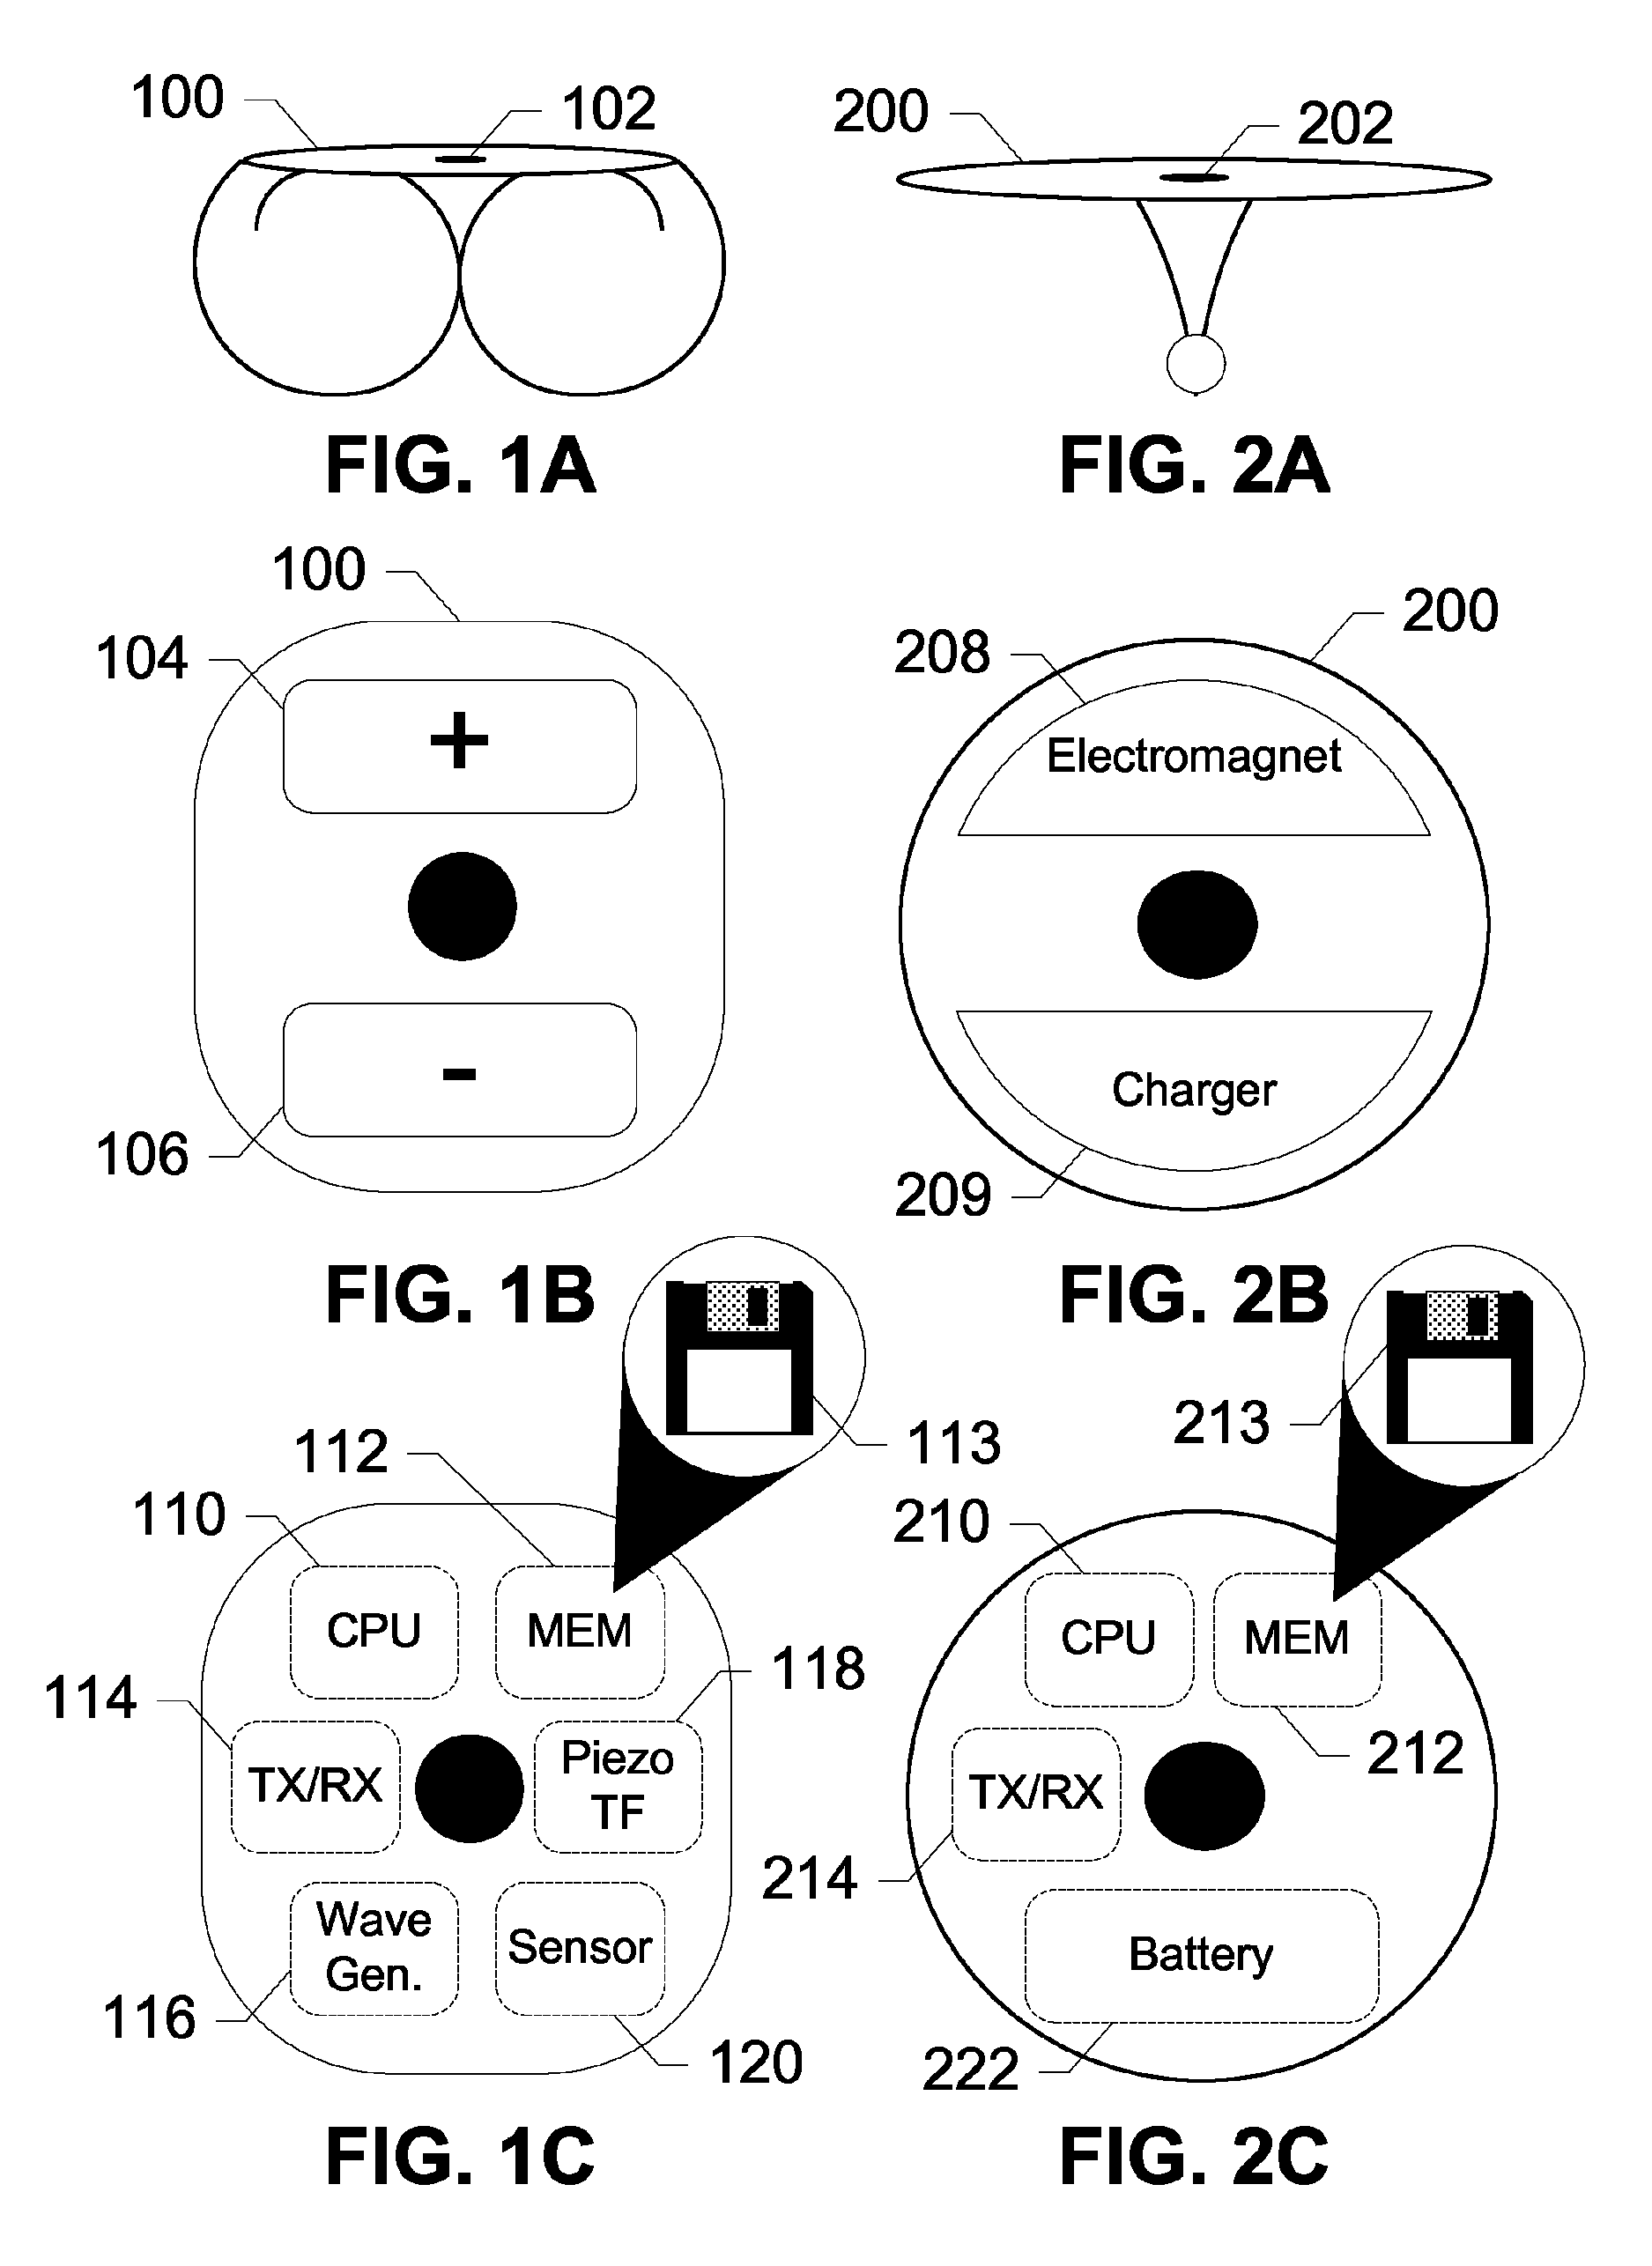 Devices, systems, and methods for notification of events on a wireless communication device